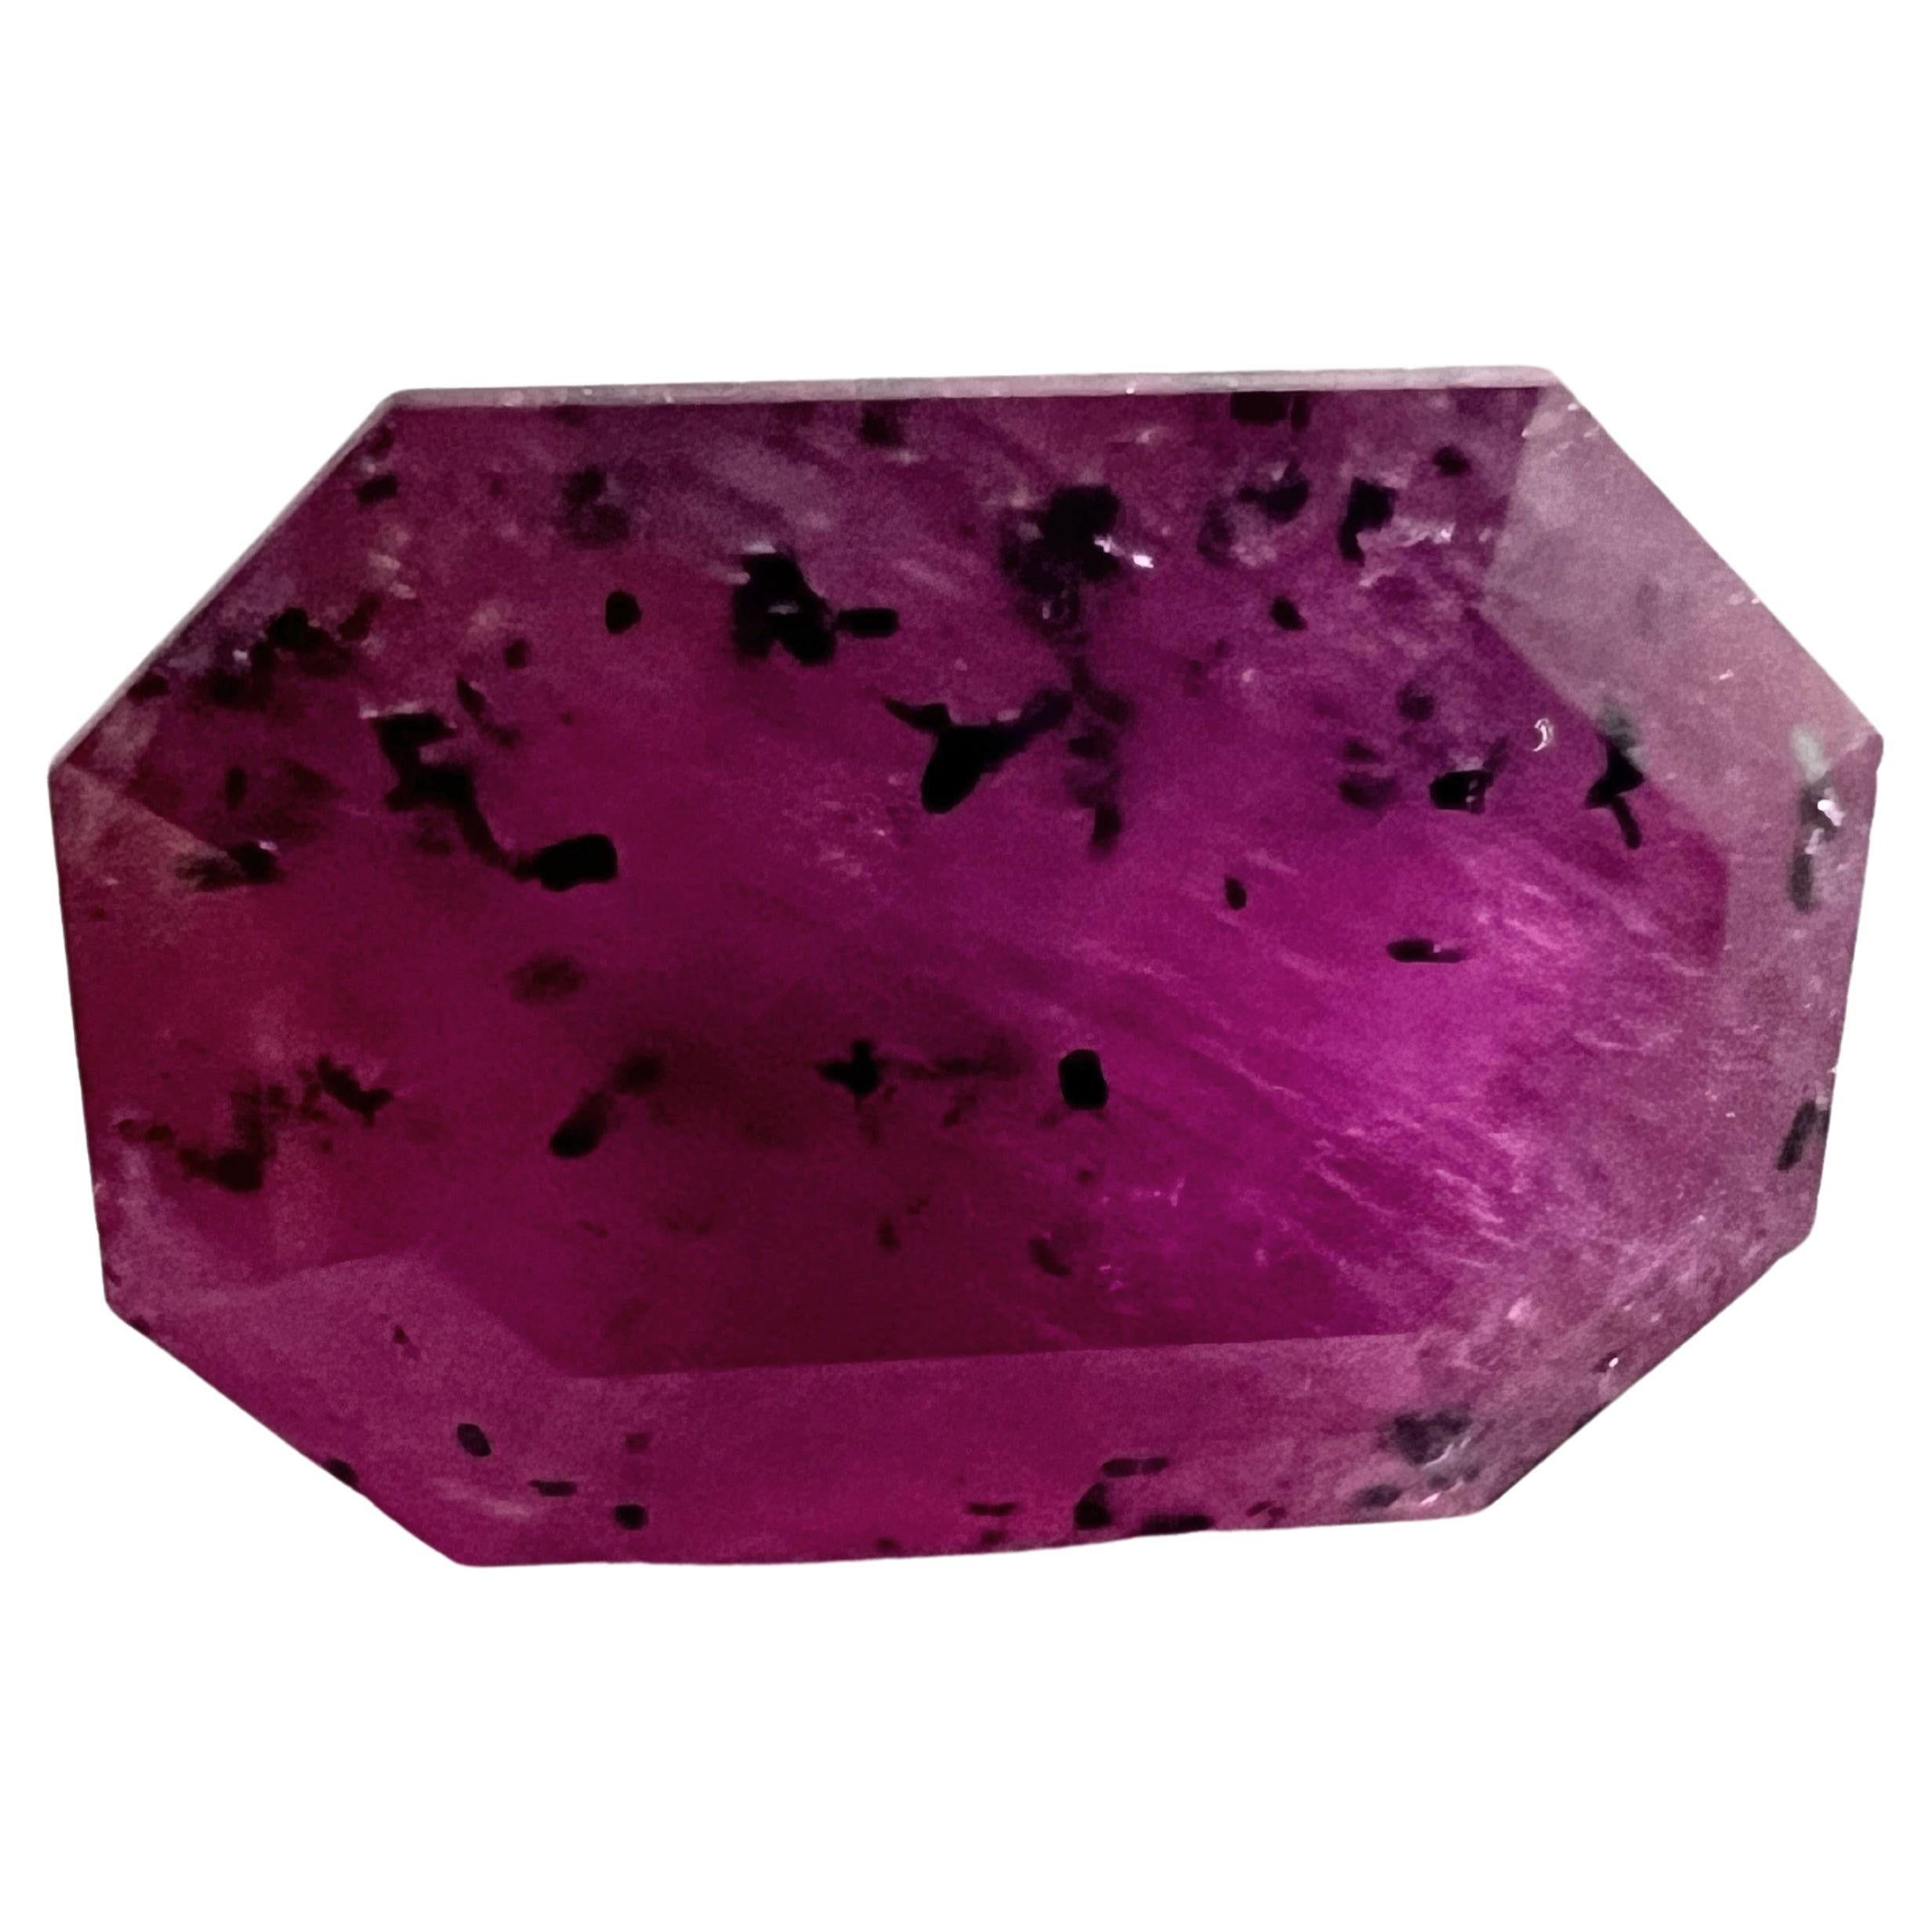 Artisan NO RESERVE 4.285ct NATURAL RUBY  Octagonal Cut Loose Gemstone For Sale